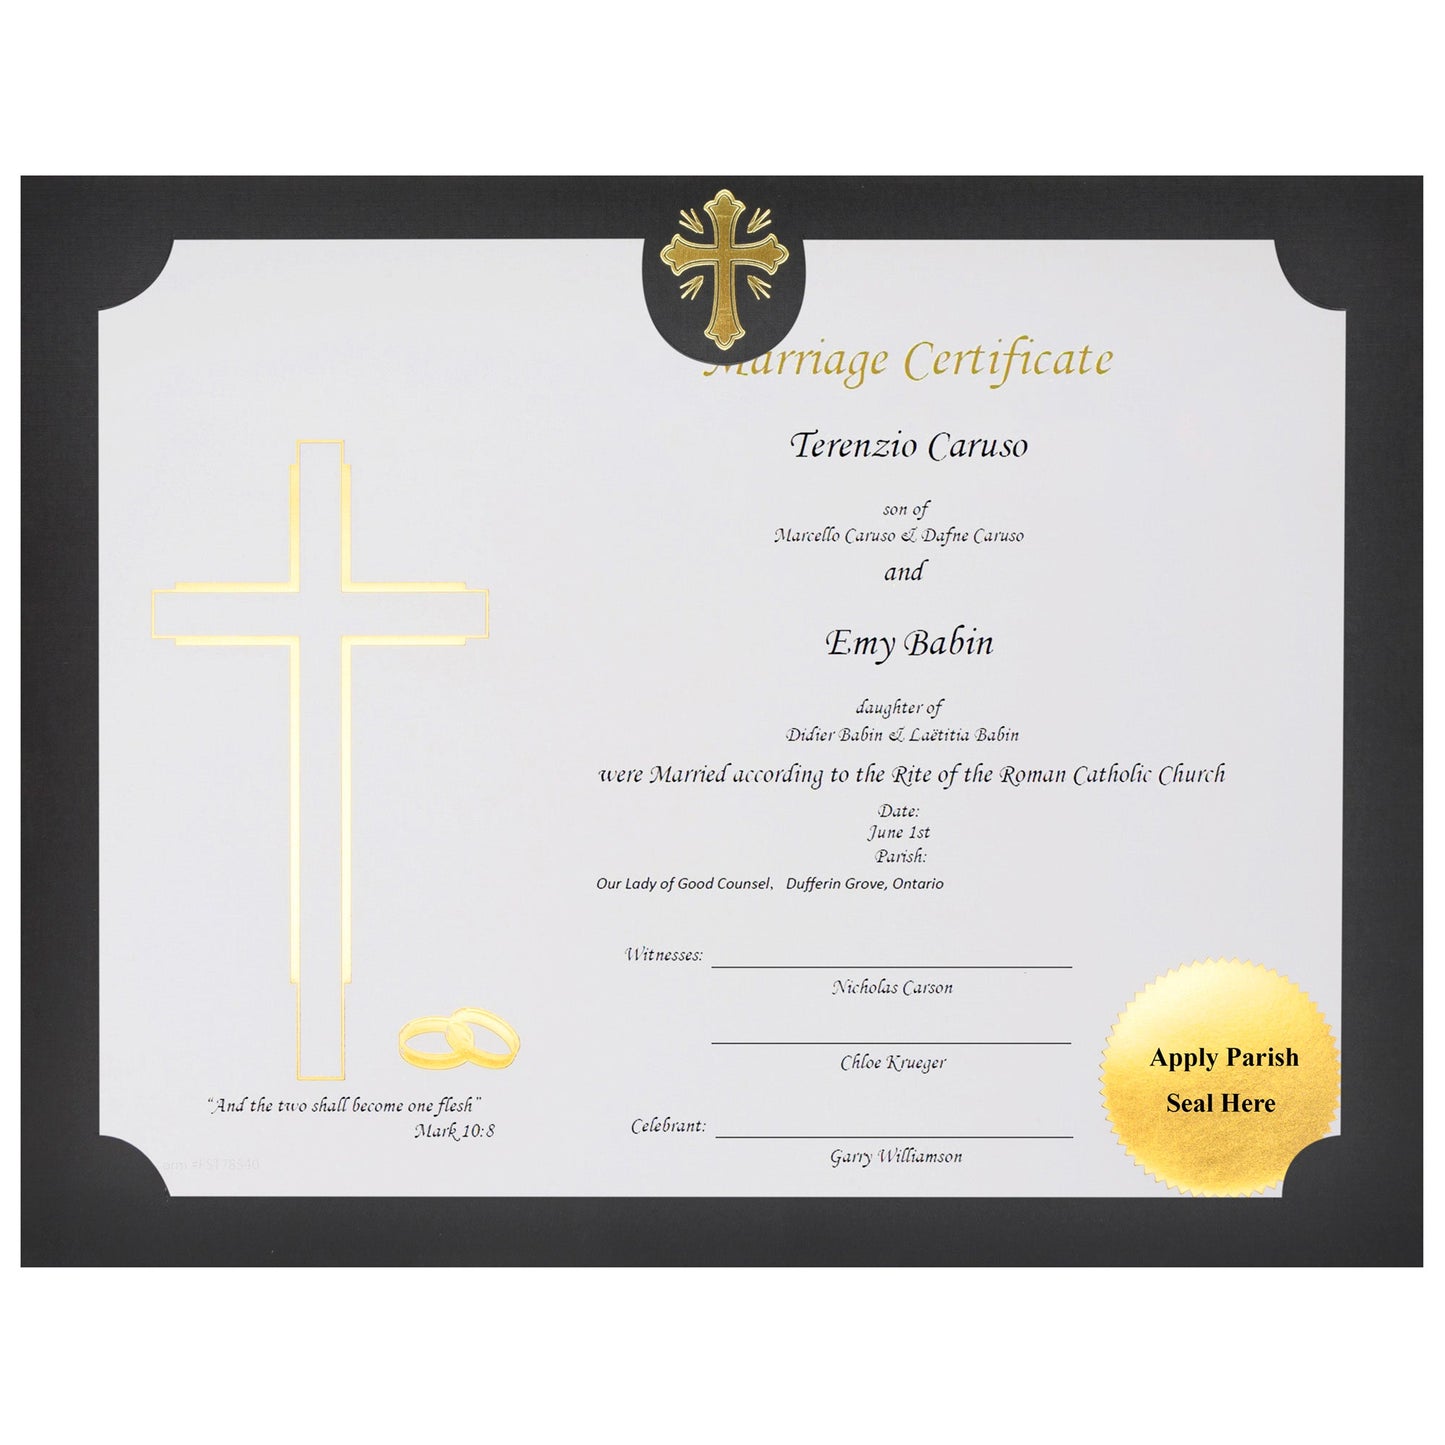 St. James® Religious Certificates - Marriage Certificates, 65 lb, Gold Foil, White Card Stock, Pack of 50